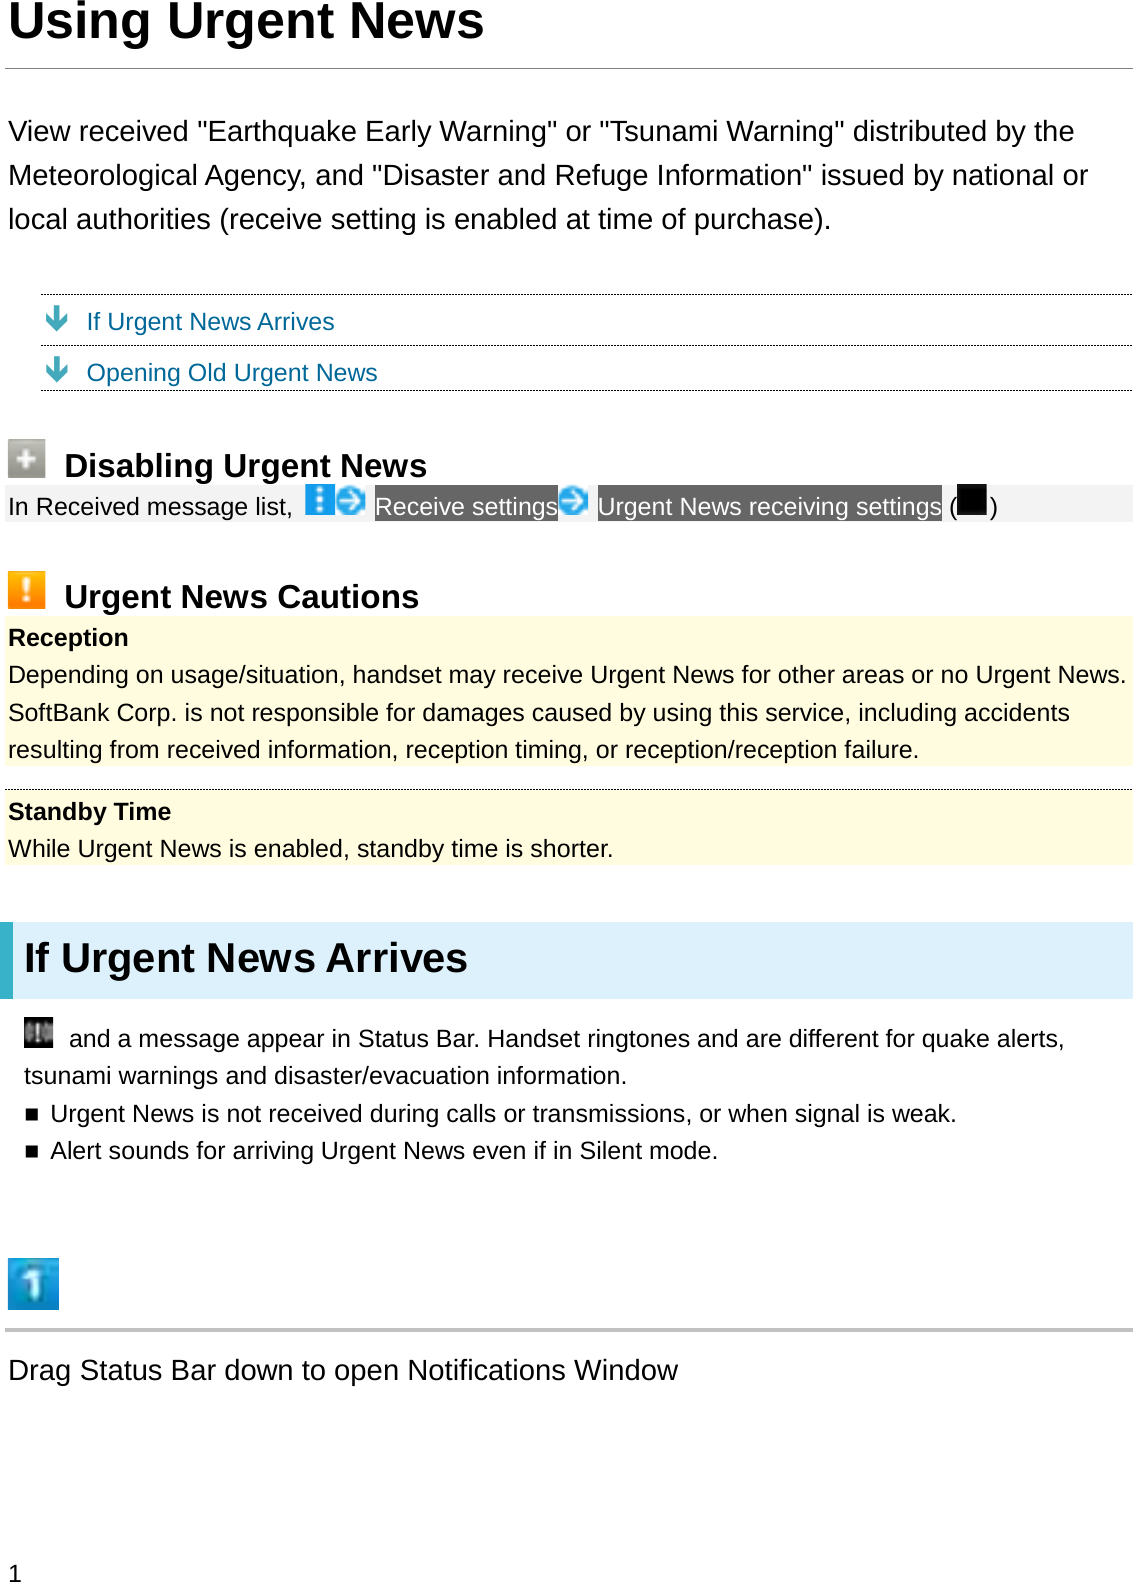 Using Urgent NewsView received &quot;Earthquake Early Warning&quot; or &quot;Tsunami Warning&quot; distributed by the Meteorological Agency, and &quot;Disaster and Refuge Information&quot; issued by national or local authorities (receive setting is enabled at time of purchase).ÐIf Urgent News ArrivesÐOpening Old Urgent NewsDisabling Urgent NewsIn Received message list,  Receive settings Urgent News receiving settings ( )Urgent News CautionsReceptionDepending on usage/situation, handset may receive Urgent News for other areas or no Urgent News. SoftBank Corp. is not responsible for damages caused by using this service, including accidents resulting from received information, reception timing, or reception/reception failure.Standby TimeWhile Urgent News is enabled, standby time is shorter.If Urgent News Arrivesand a message appear in Status Bar. Handset ringtones and are different for quake alerts, tsunami warnings and disaster/evacuation information.Urgent News is not received during calls or transmissions, or when signal is weak.Alert sounds for arriving Urgent News even if in Silent mode.Drag Status Bar down to open Notifications Window1